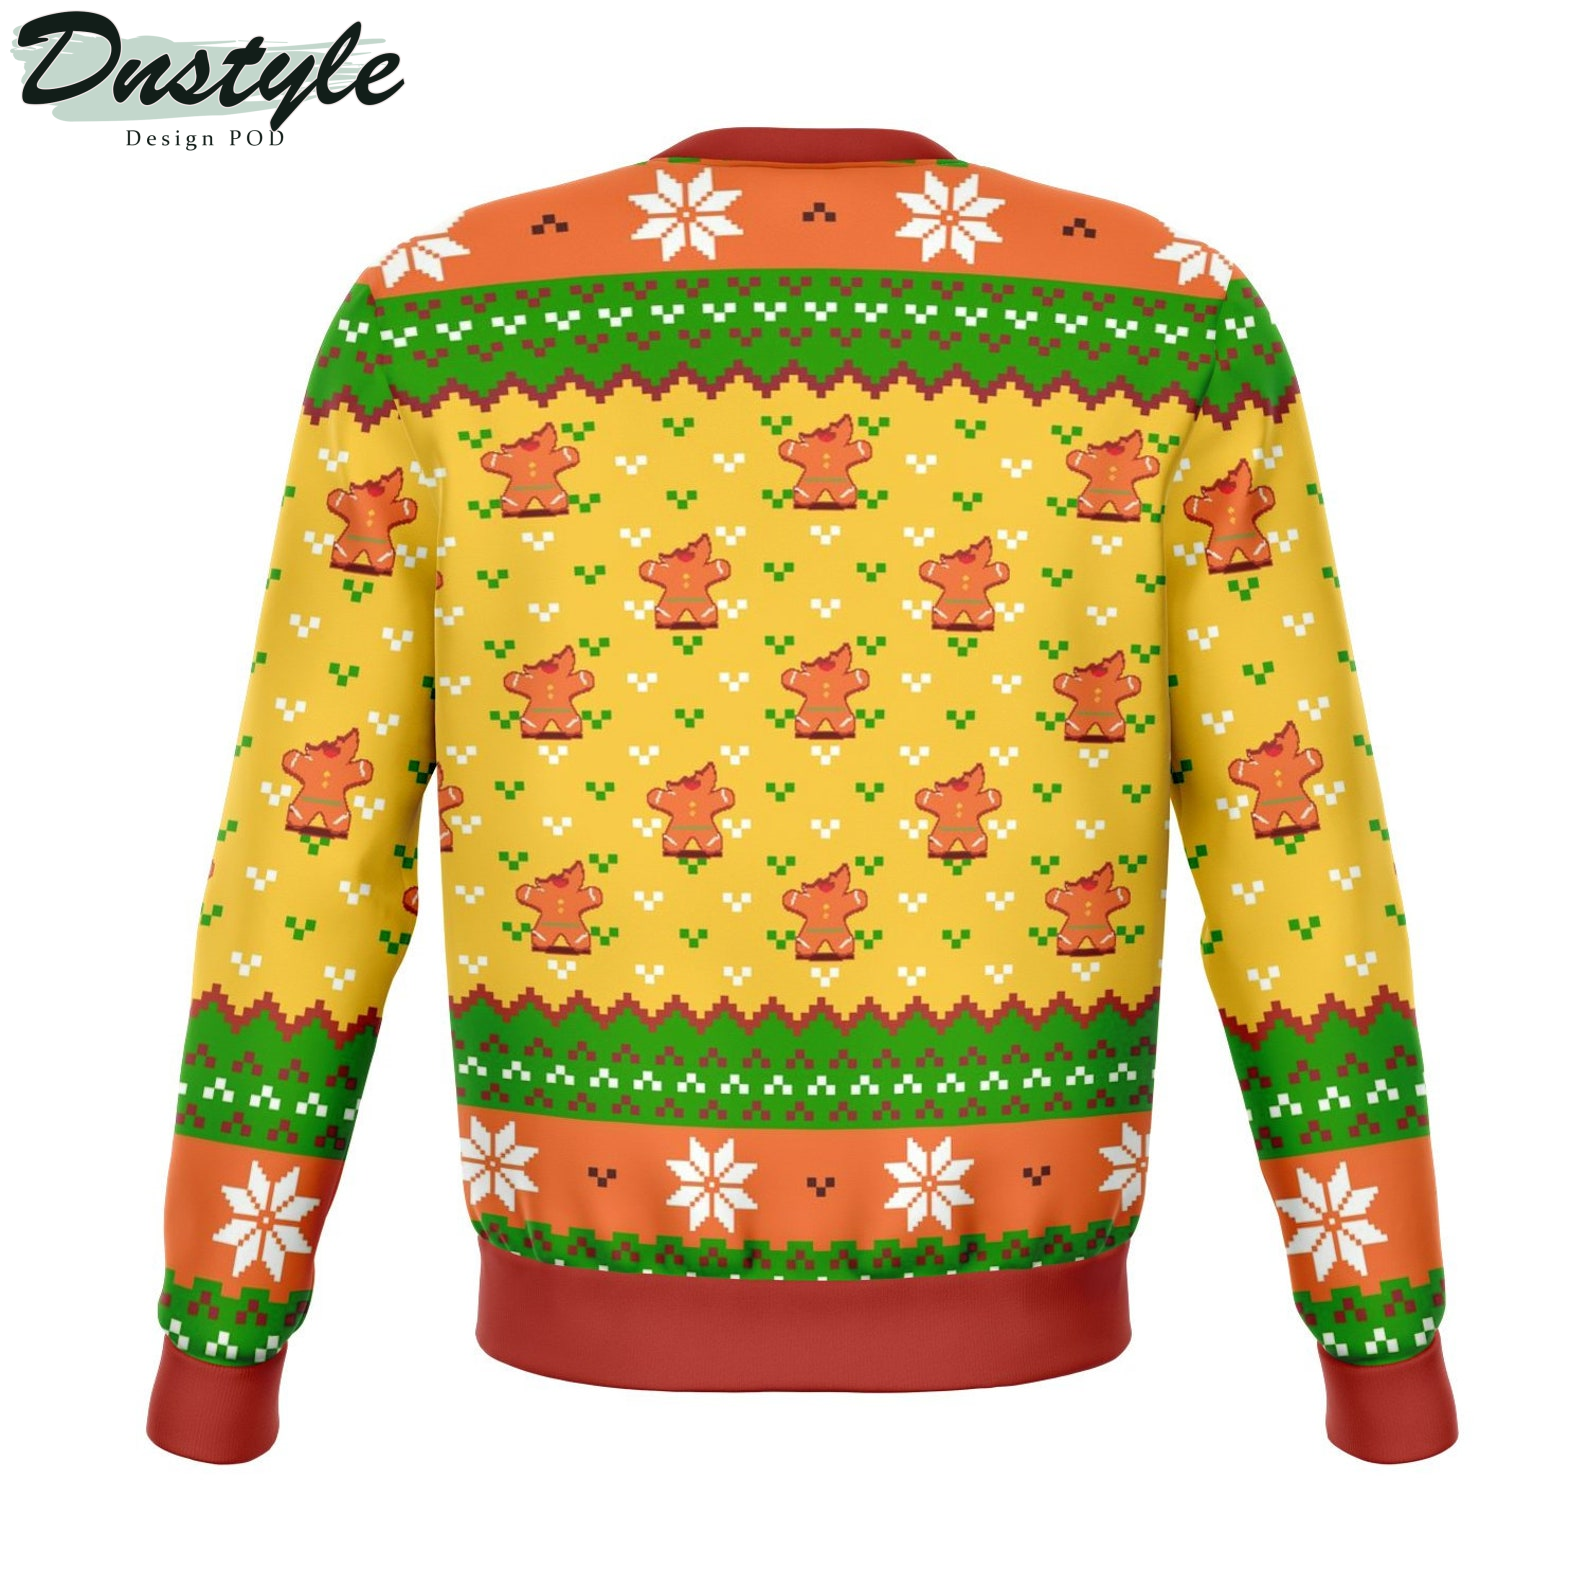 I Cant Feel My Face When I'm With You 2022 Ugly Christmas Sweater